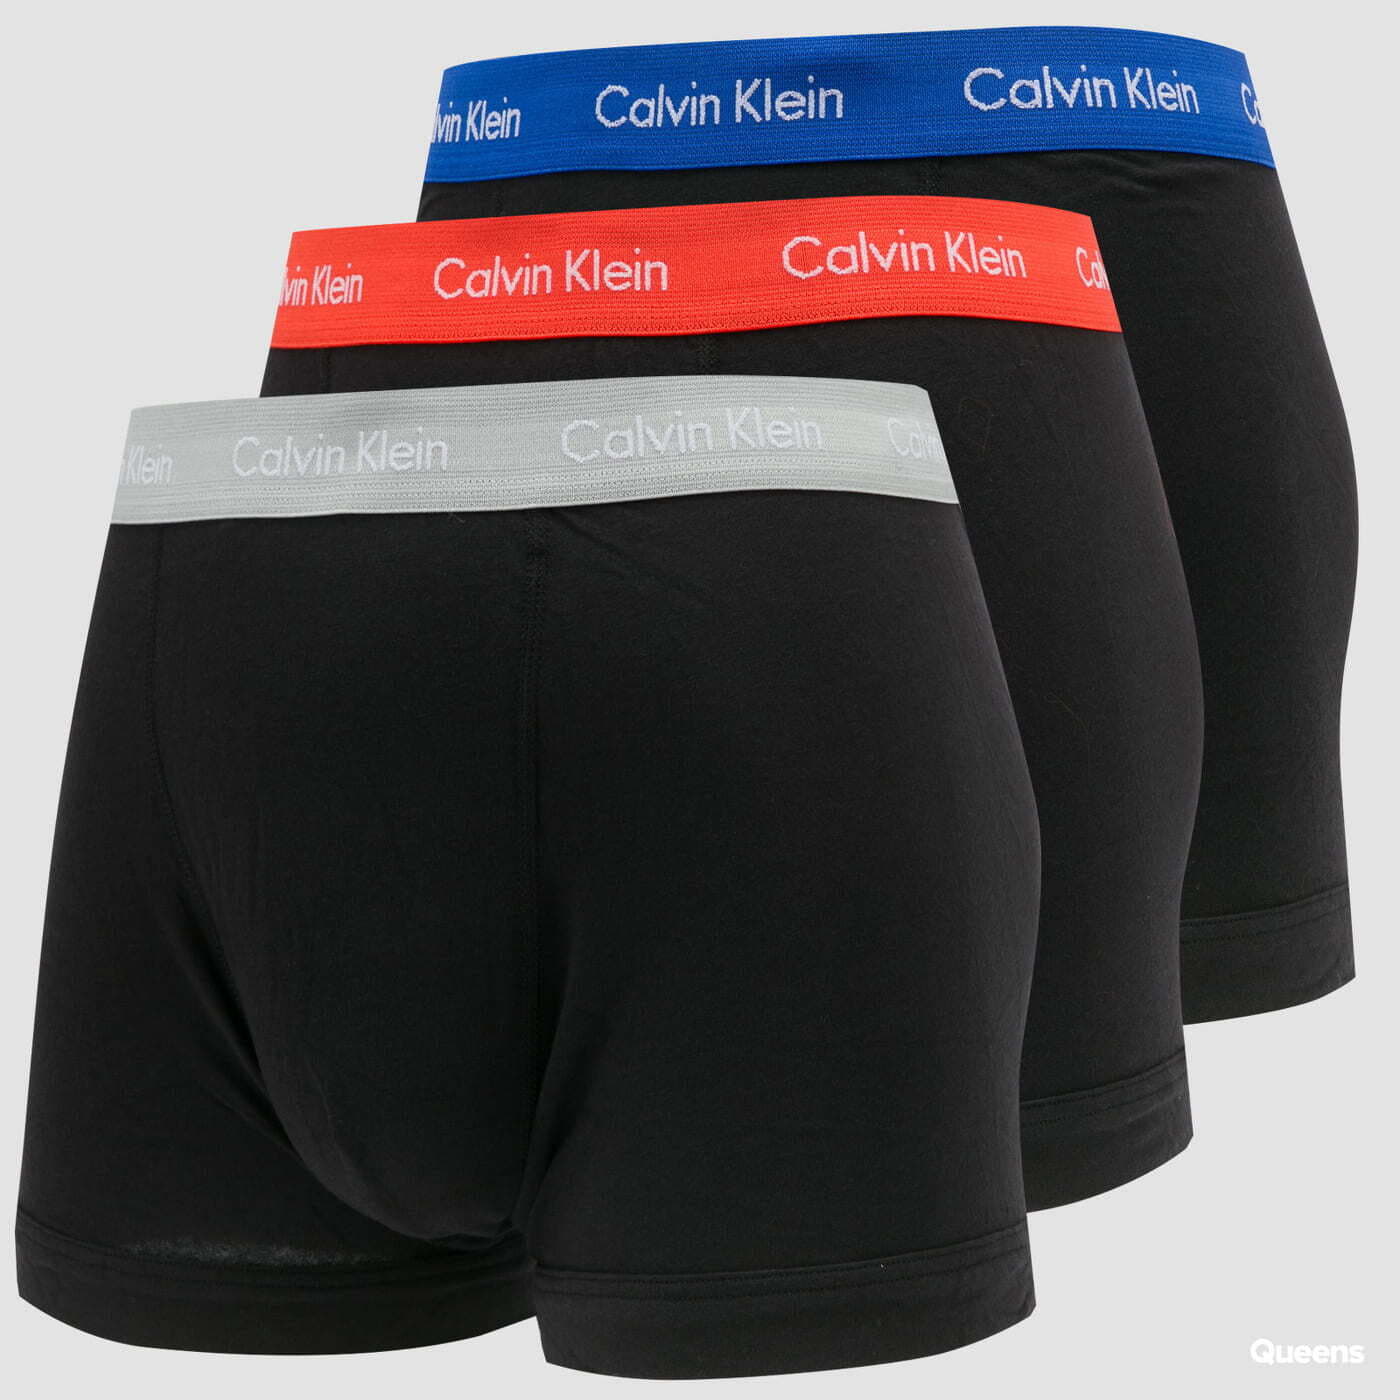 Boxer shorts Calvin Klein 3-Pack Trunks Cotton Stretch Blue Royalty/ Grey/ Exotic Coral